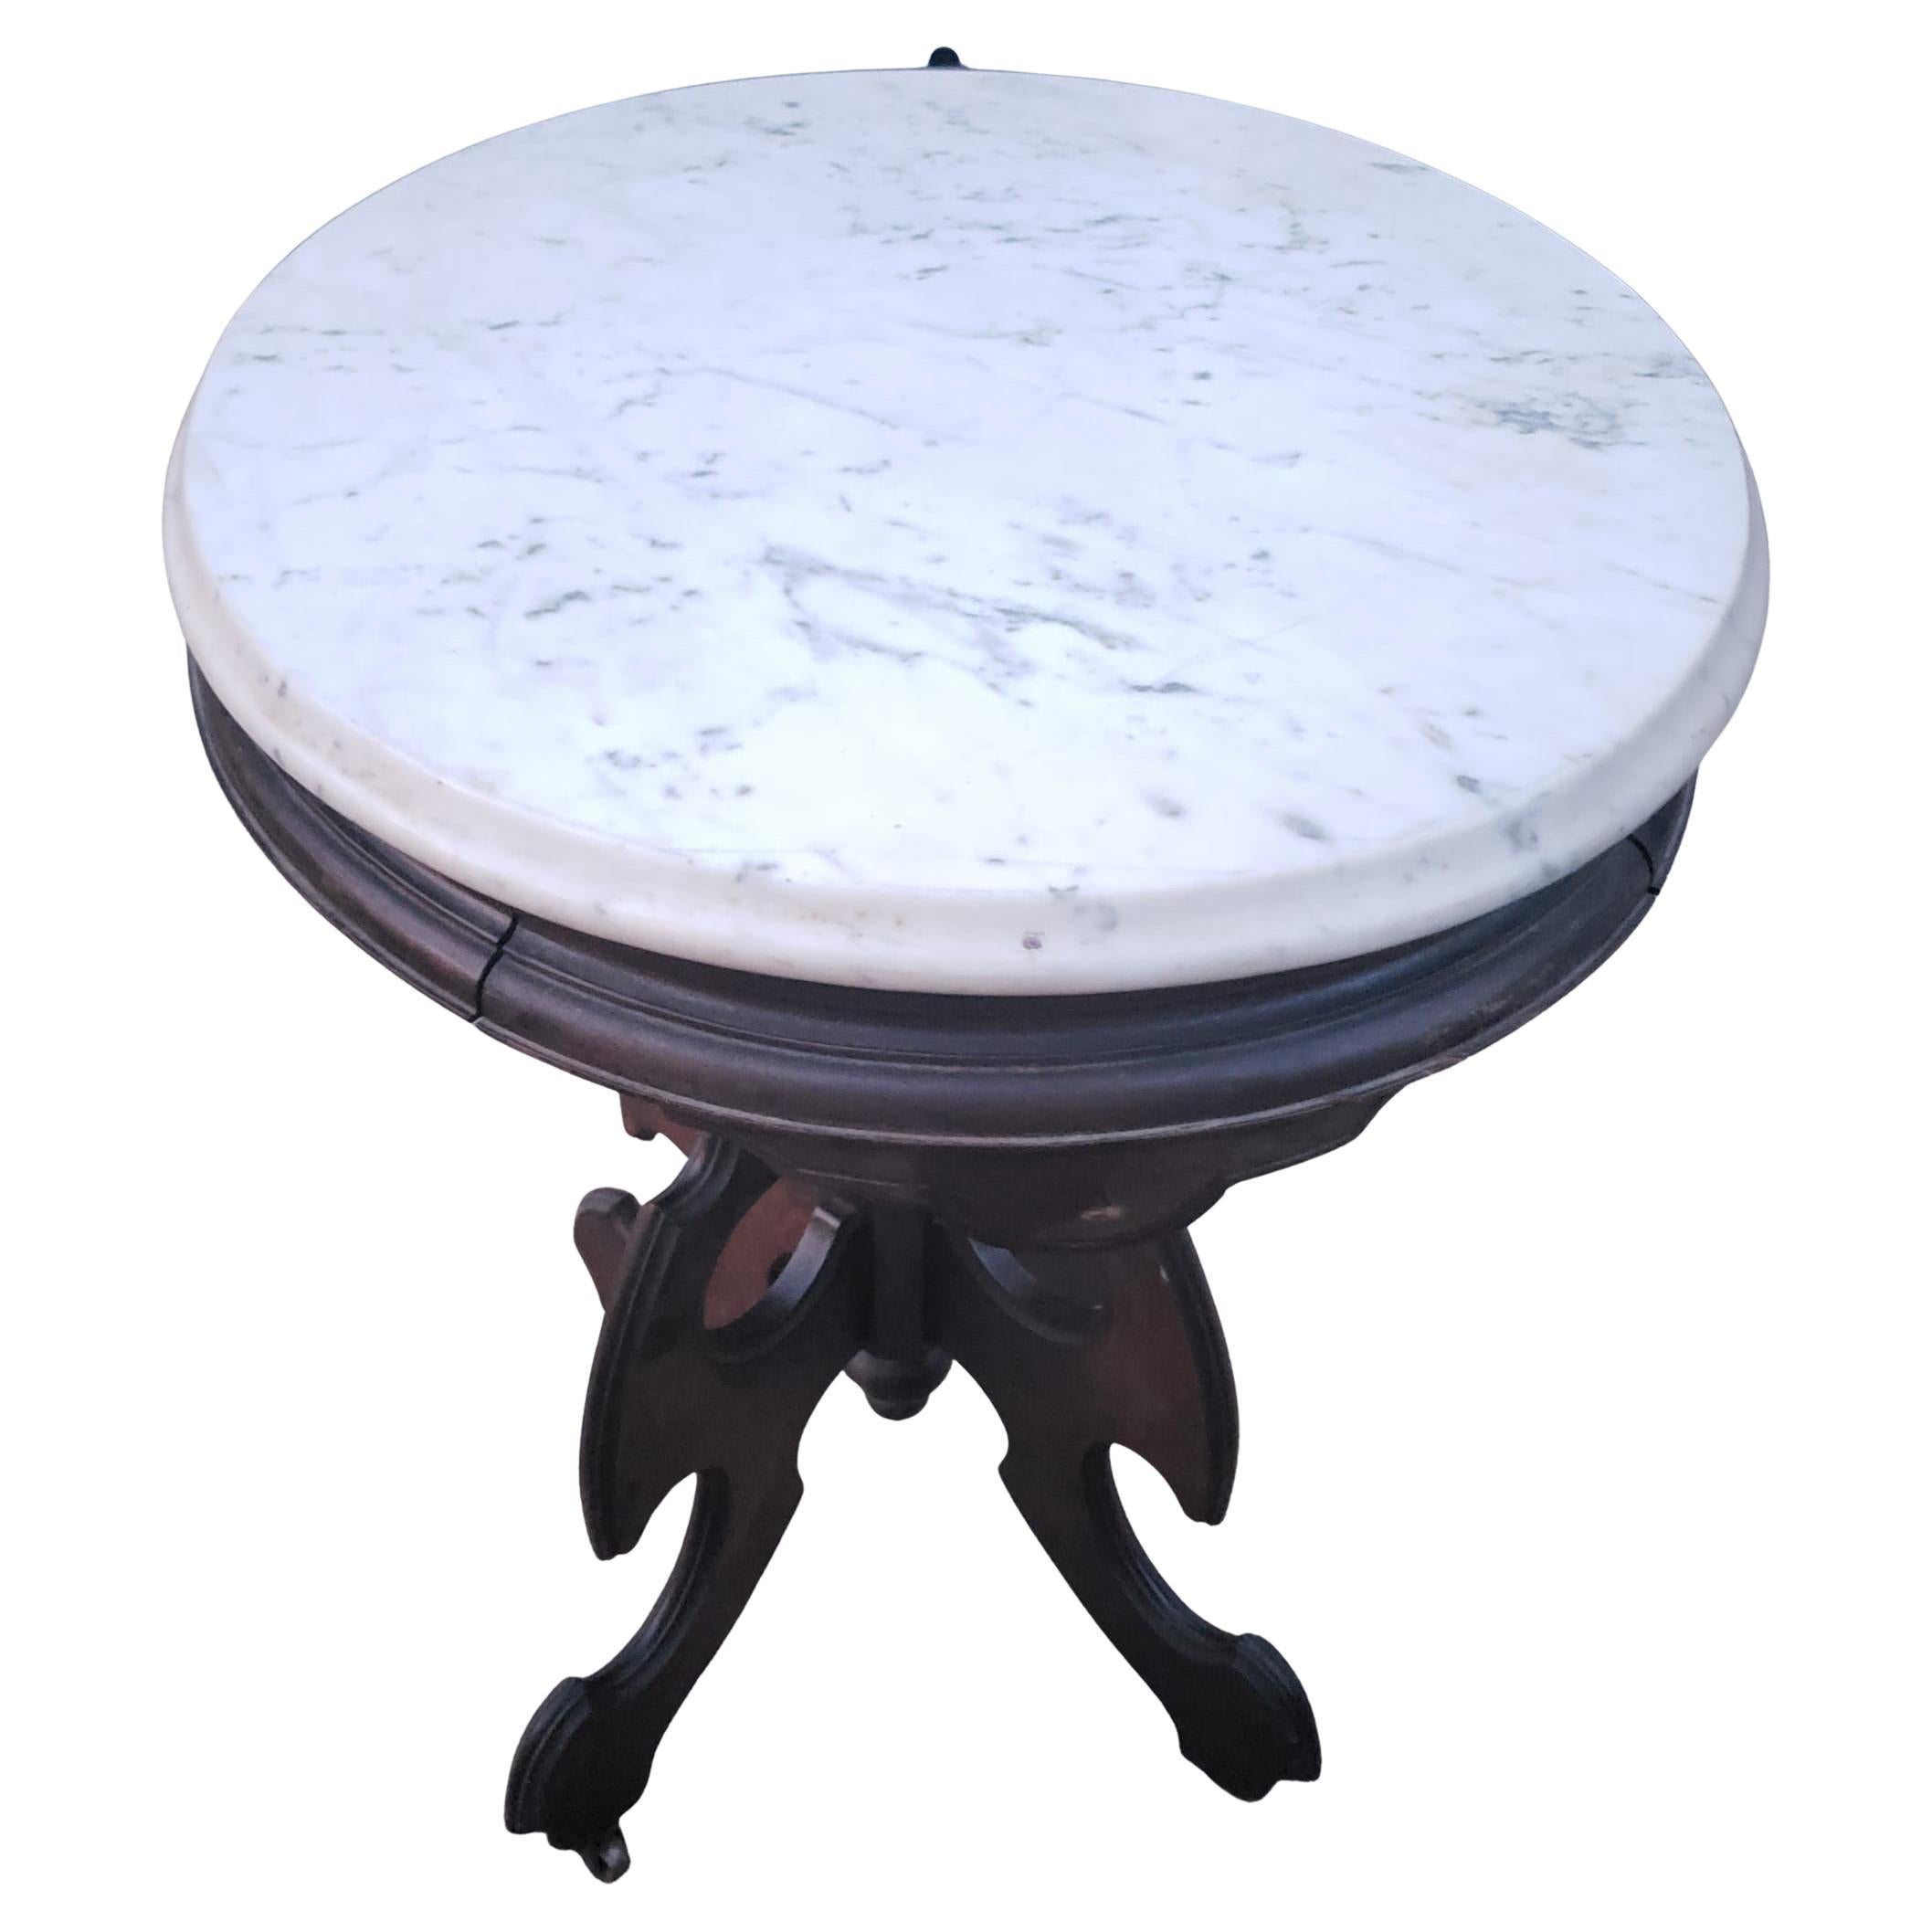 North American Victorian Walnut and Carrara Marble Top Oval Accent Table, Circa 1890s